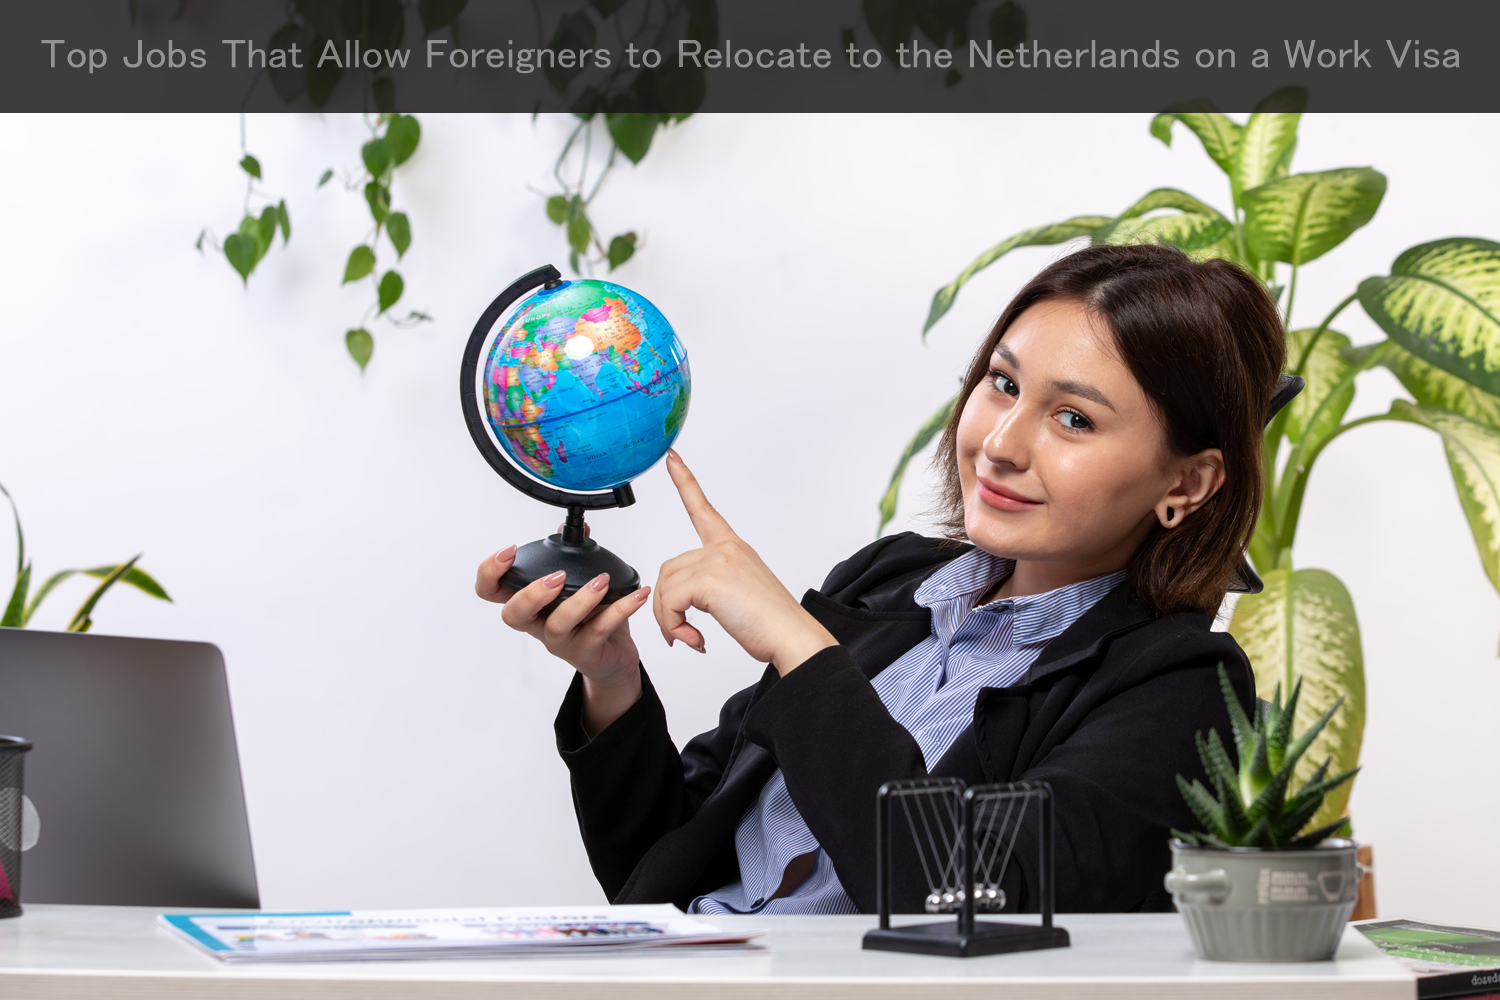 Top Jobs That Allow Foreigners to Relocate to the Netherlands on a Work Visa.